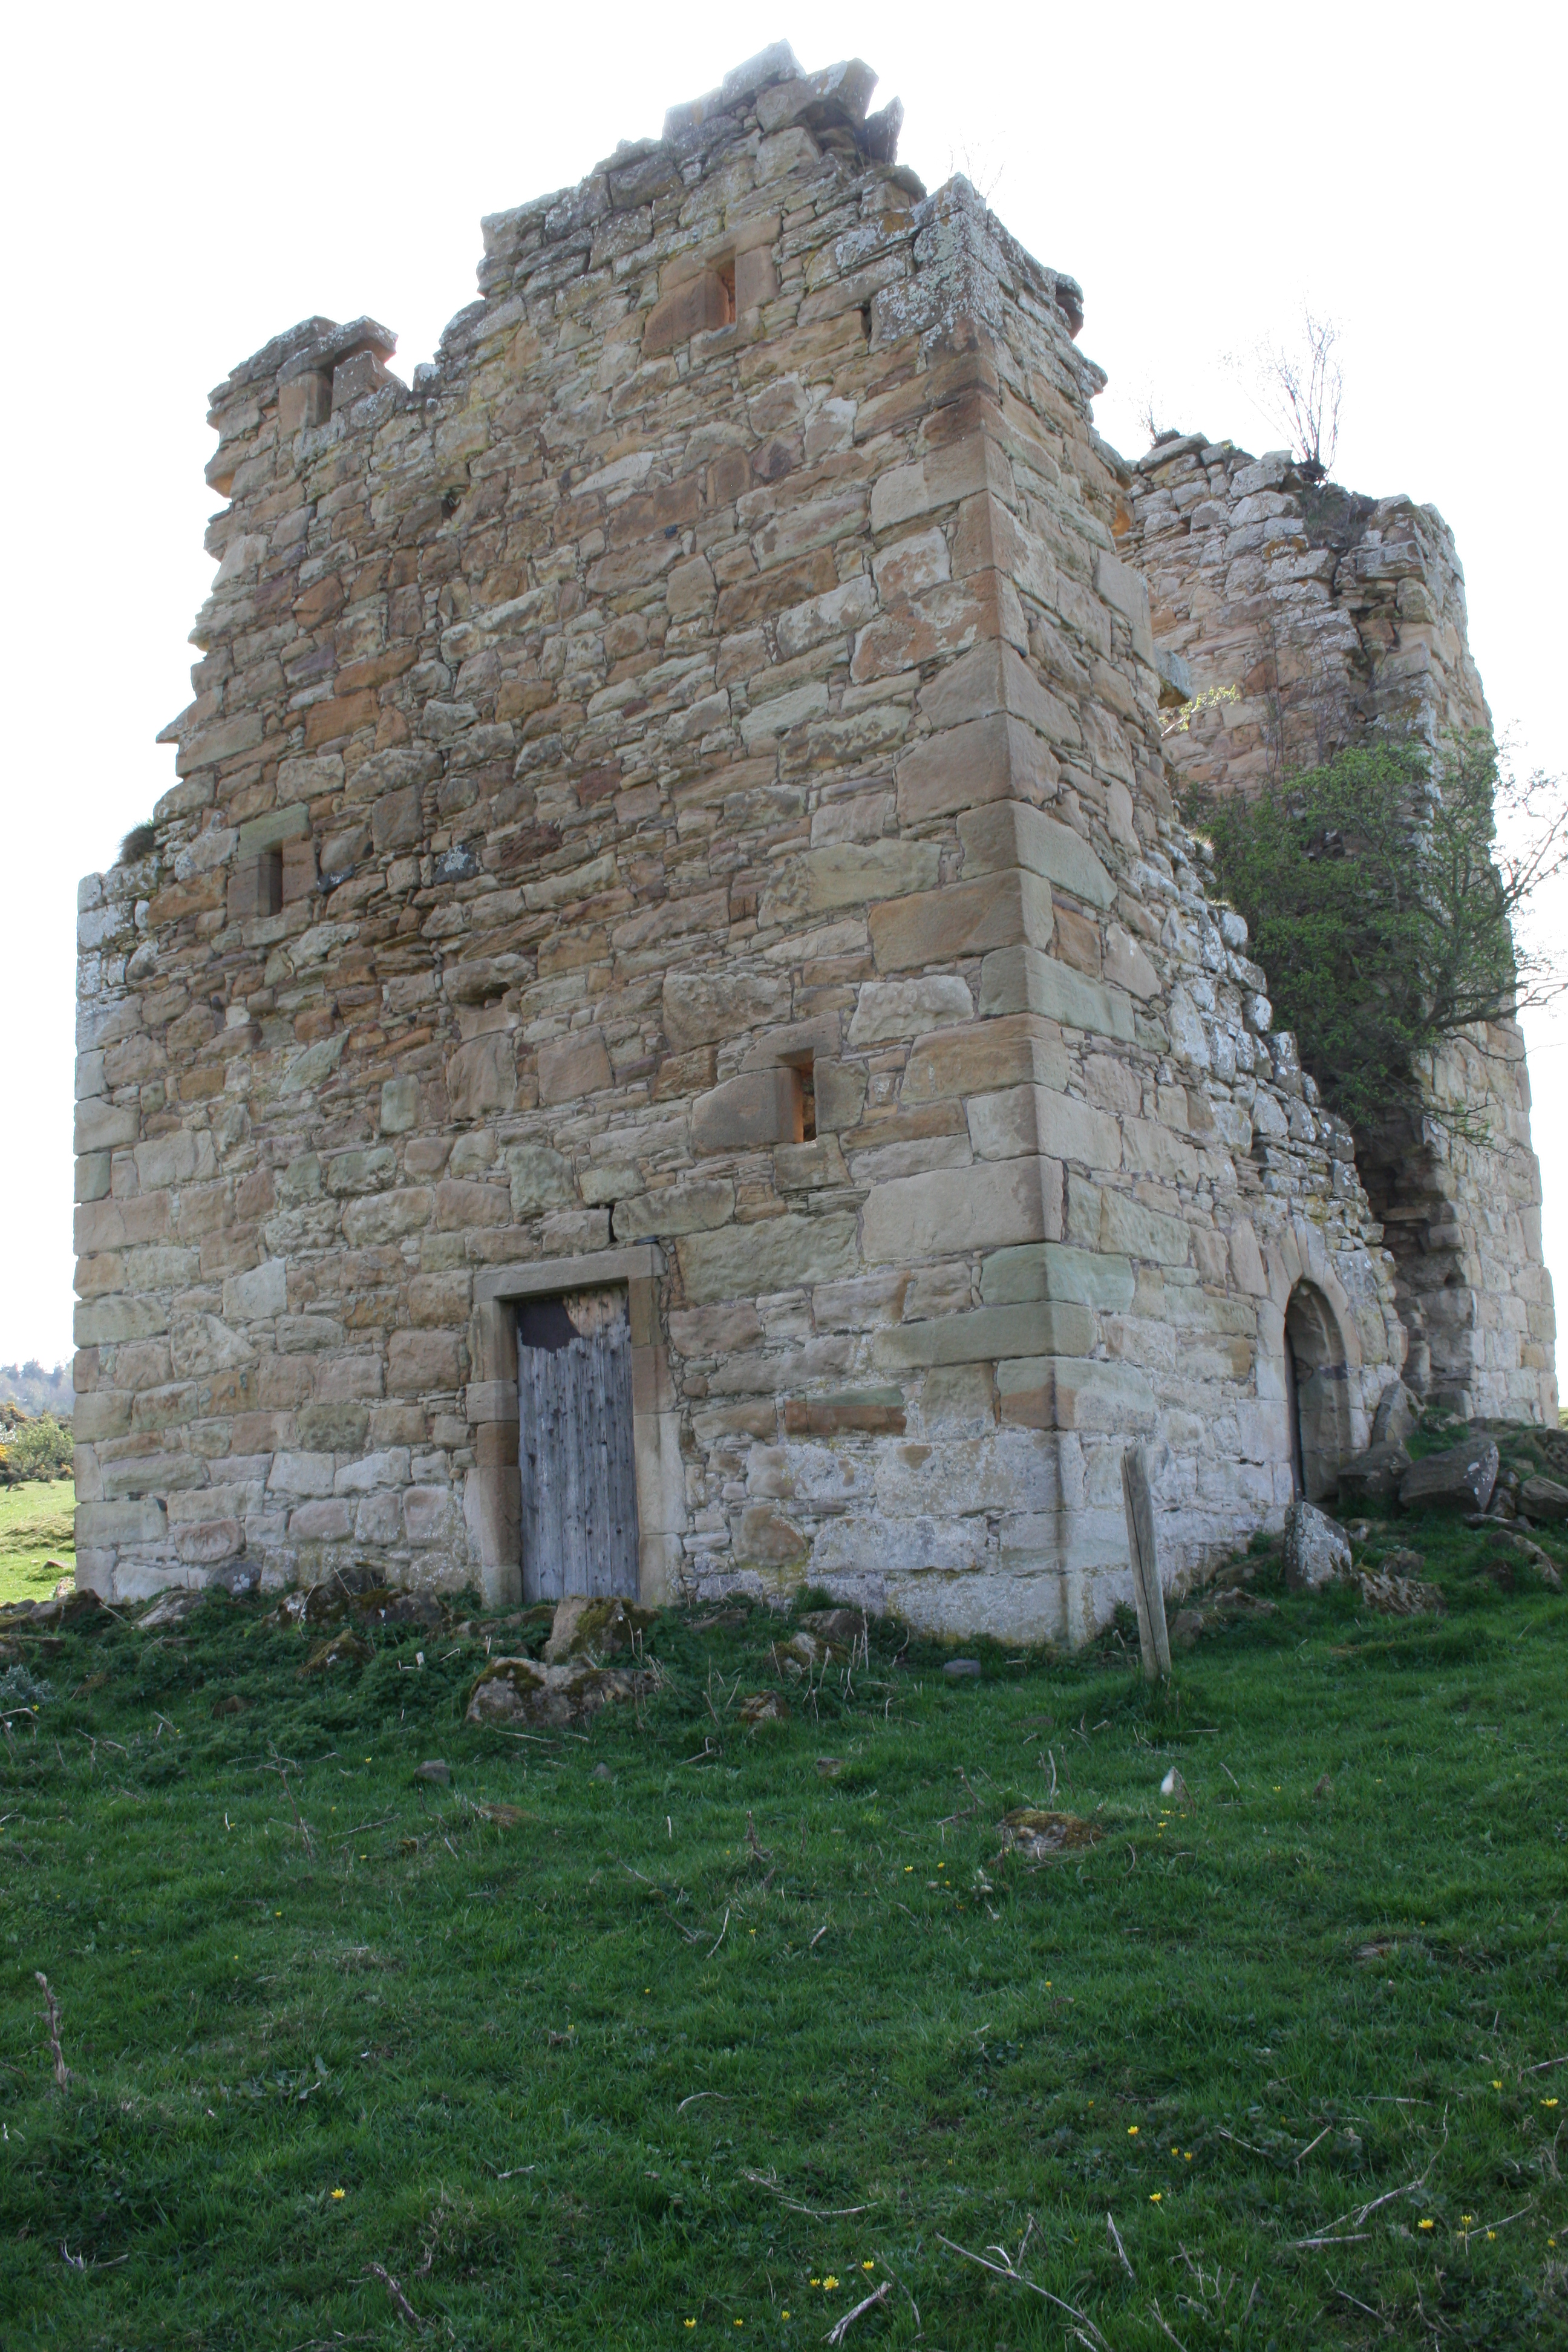 Timpendean Tower